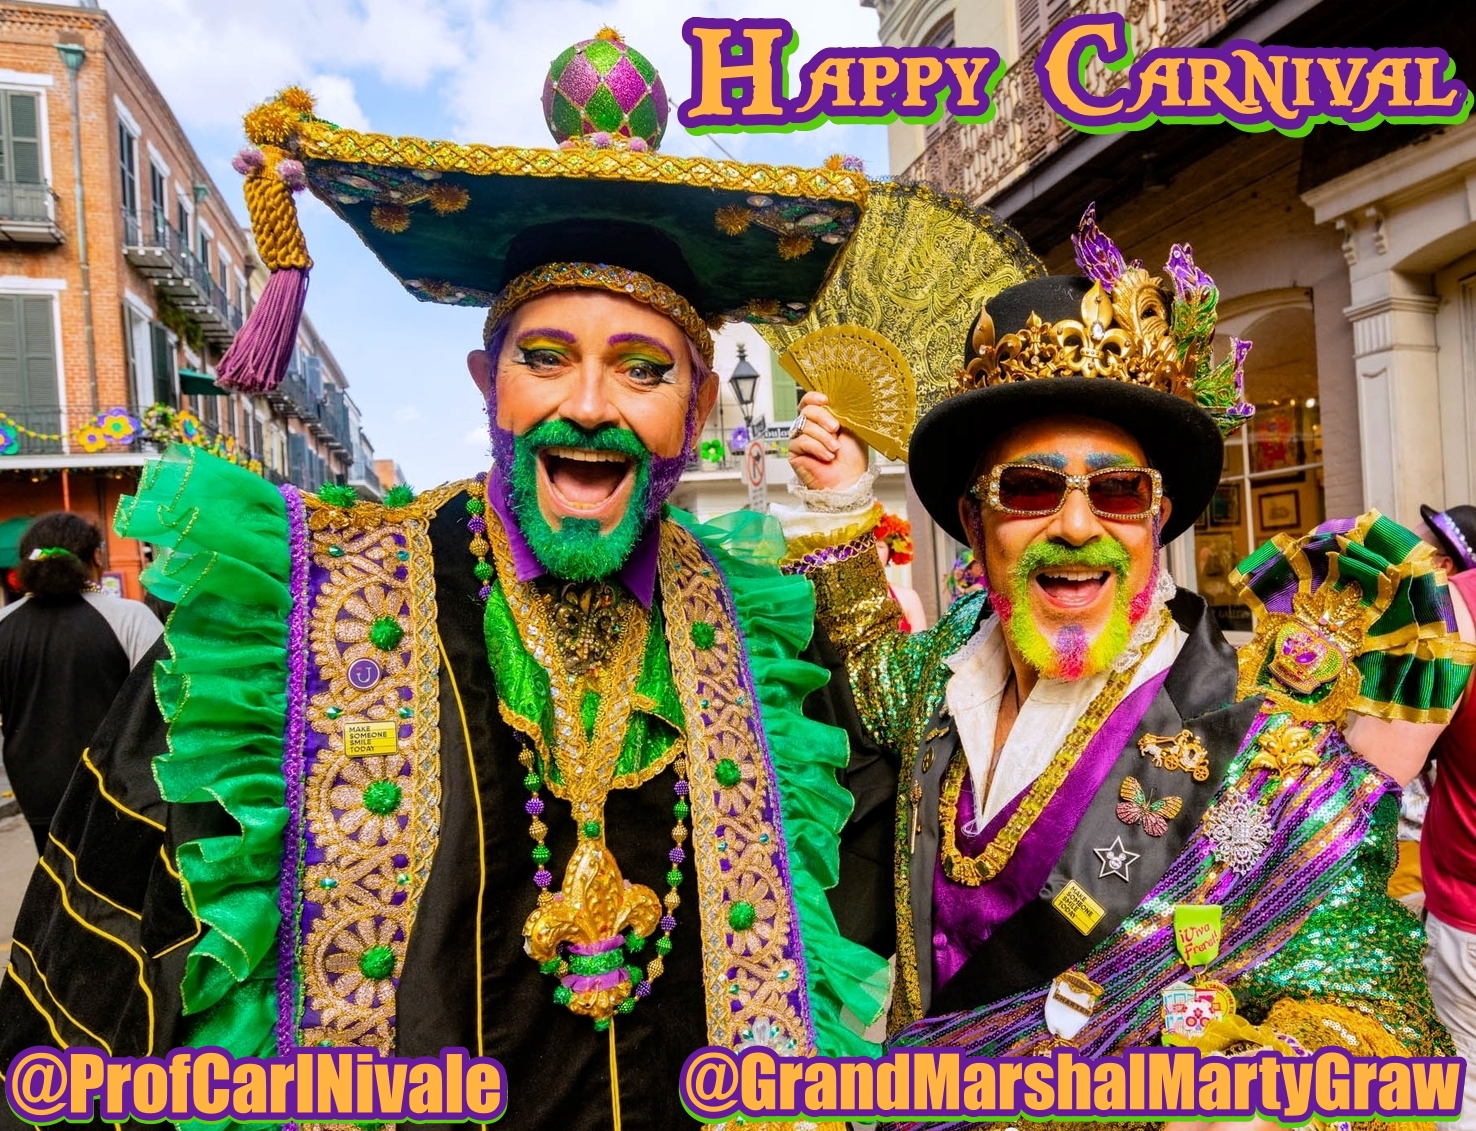 Professor Carl Nivale and Grand Marshal Marty Graw in the thick of Carnival Revelry.